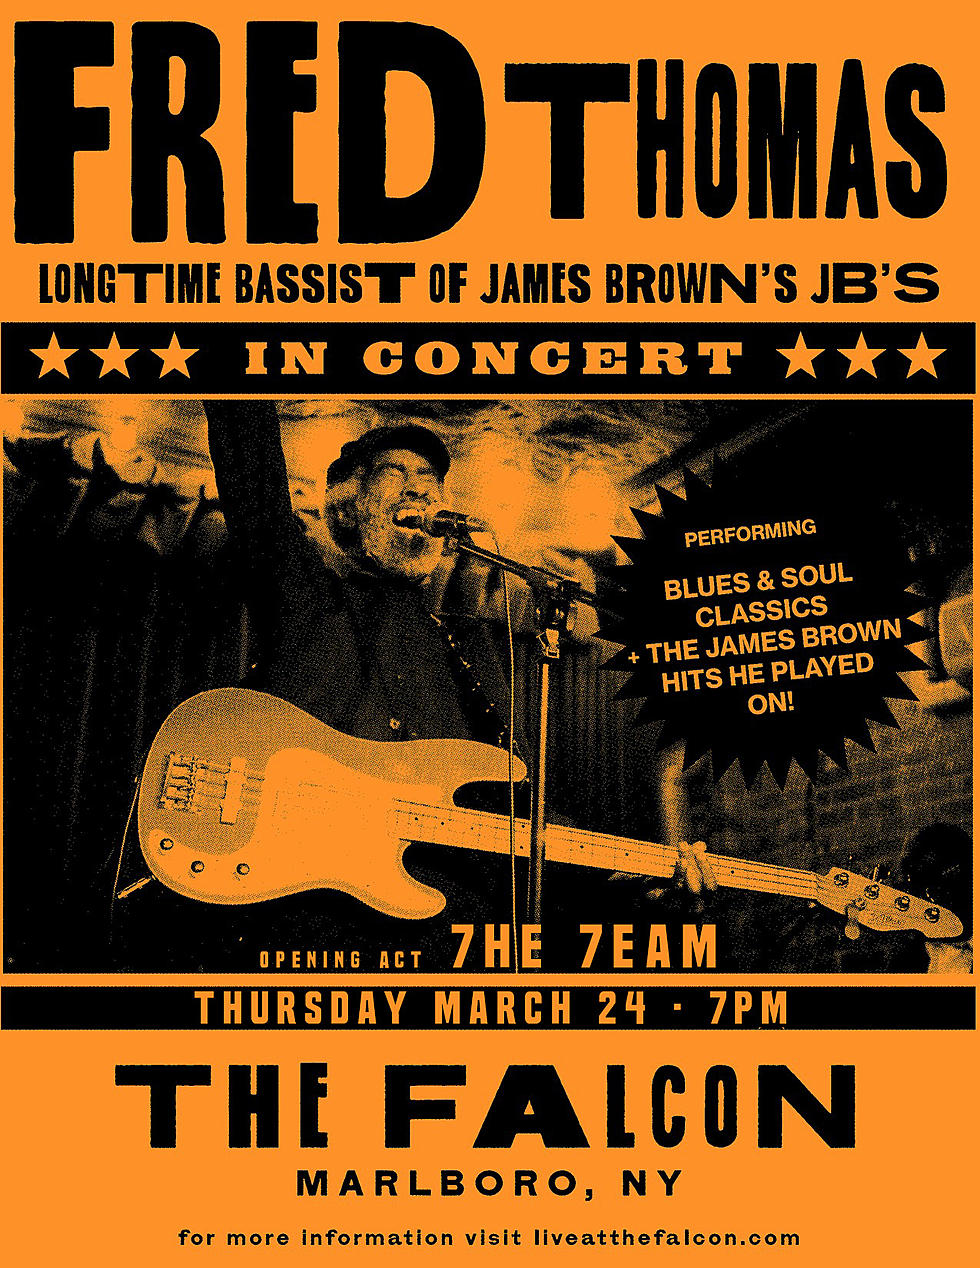 Local Band to Open for James Brown's Iconic Bassist Fred Thomas